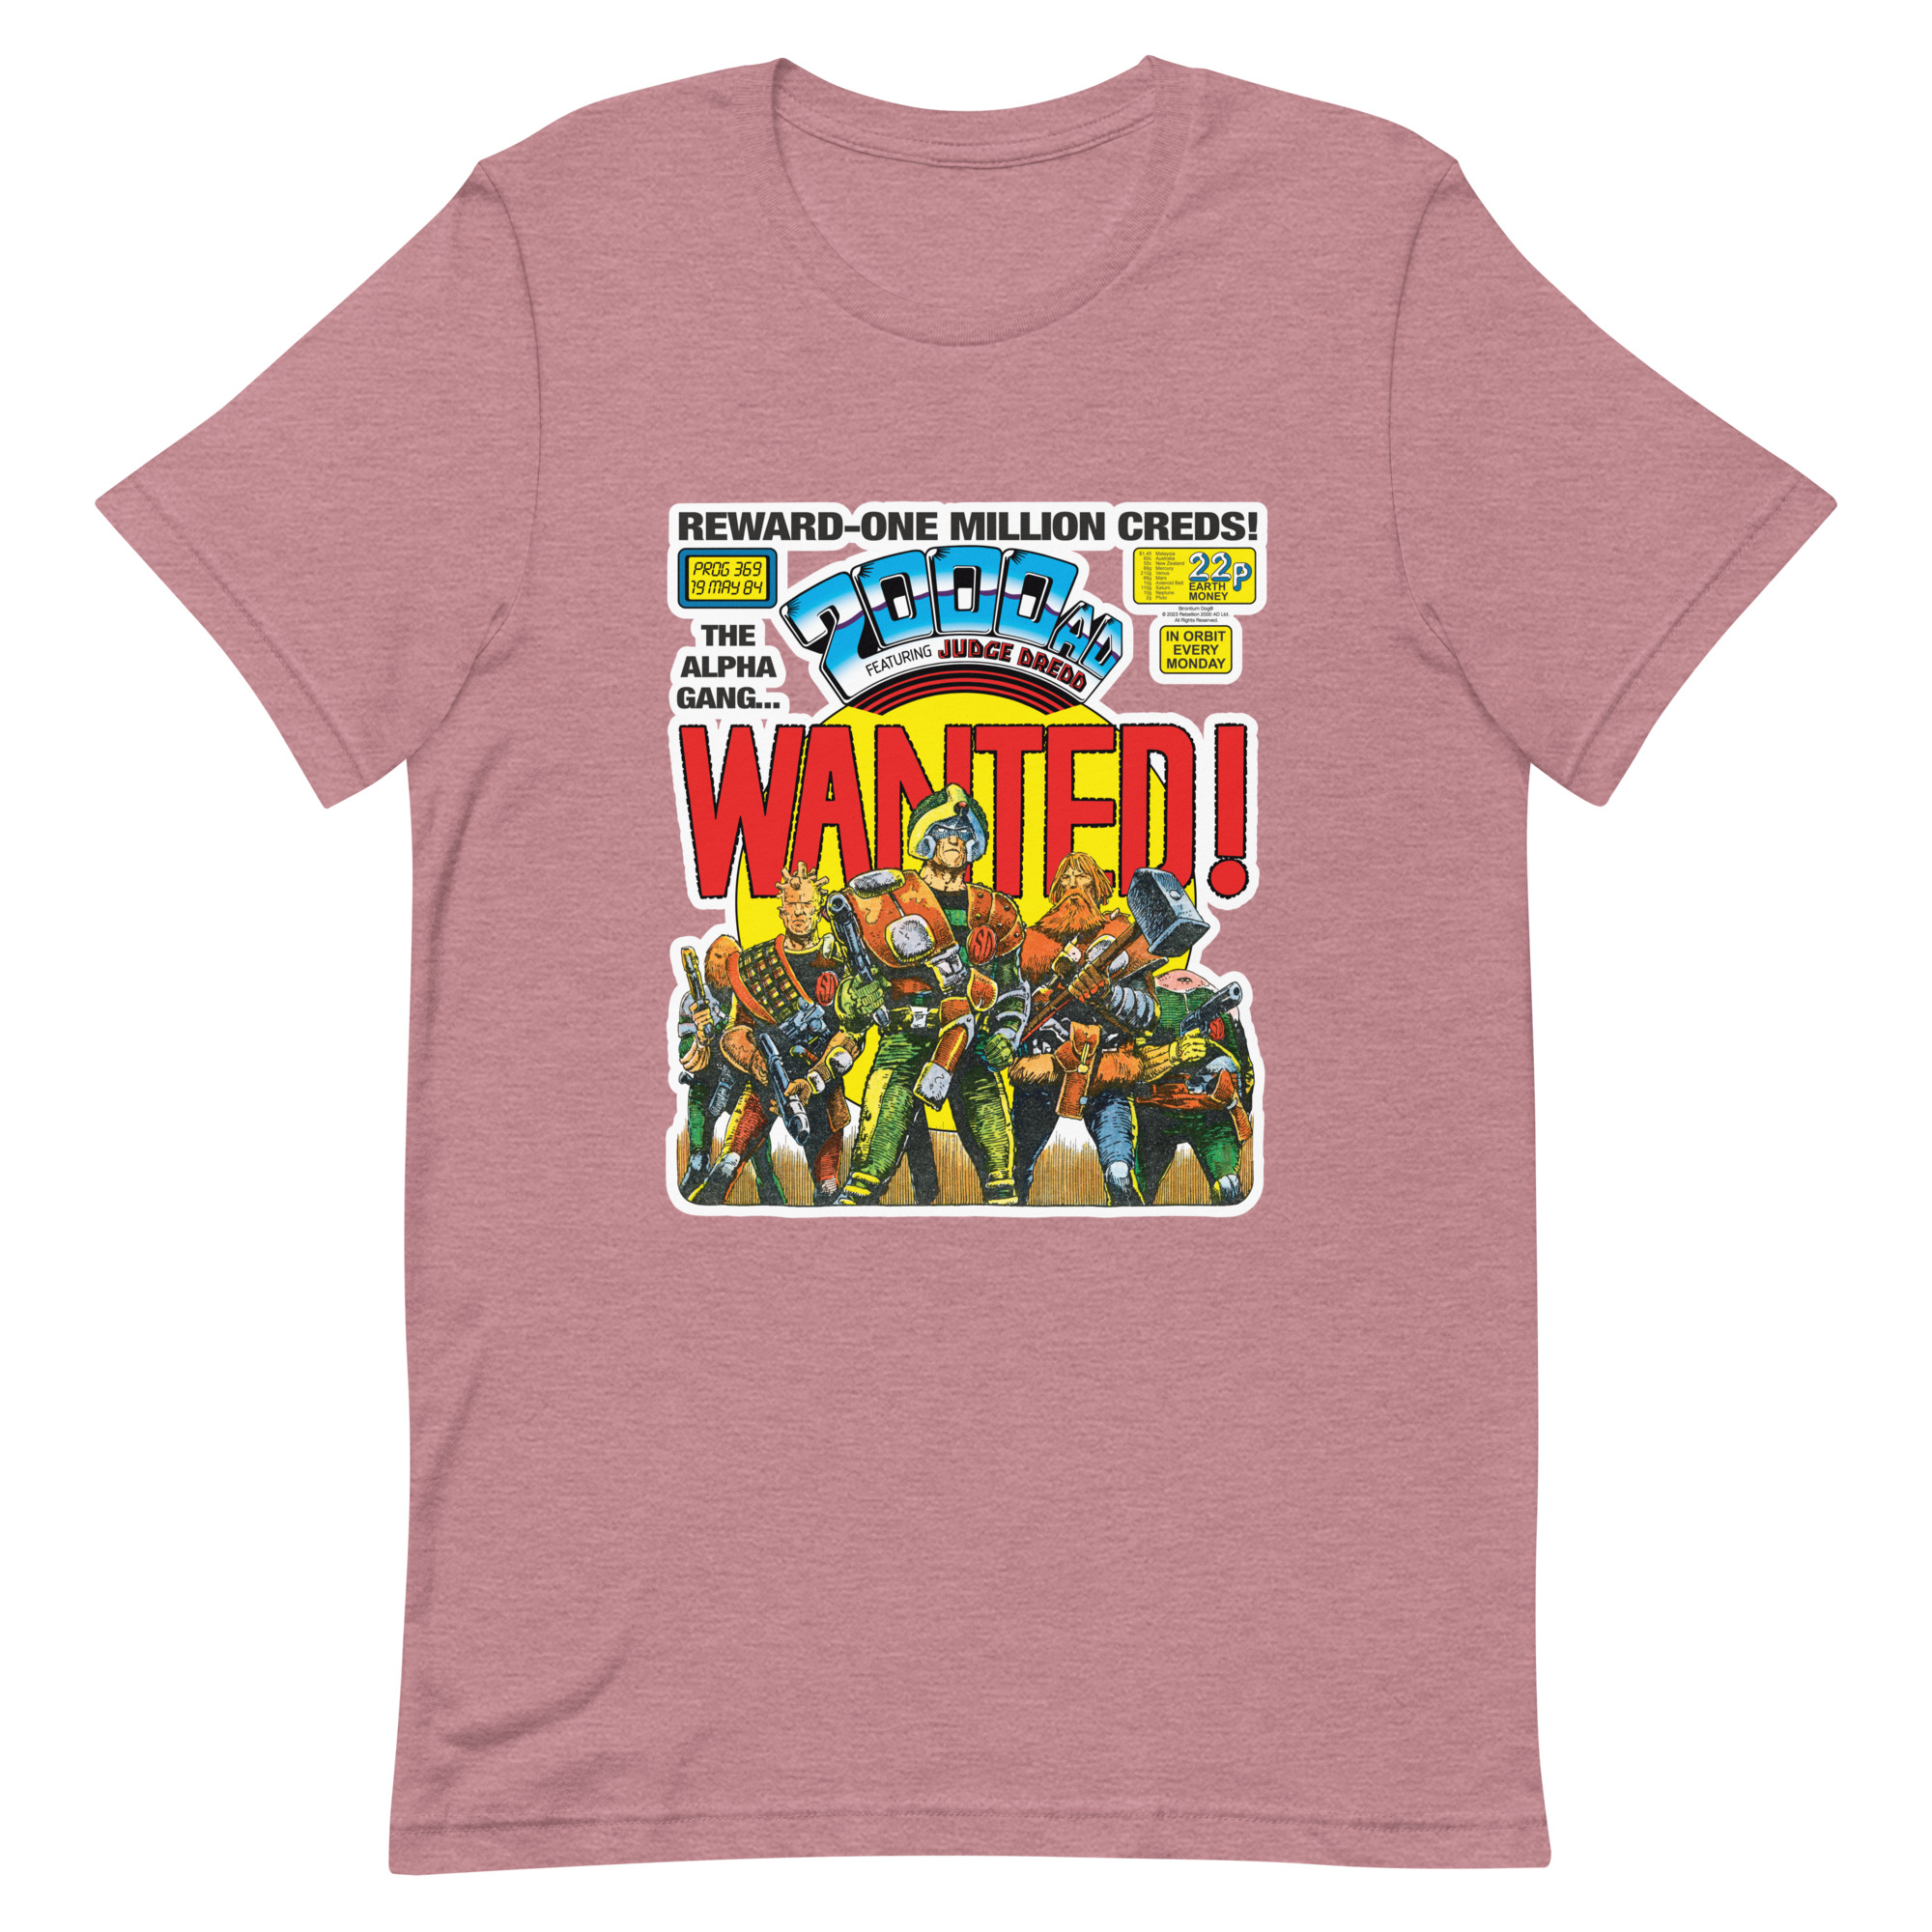 Pink Tshirt with a 'Classic' 2000 AD Cover image on the chest. In the image Strontium Dog and his team, the Alpha gang, stand ready.